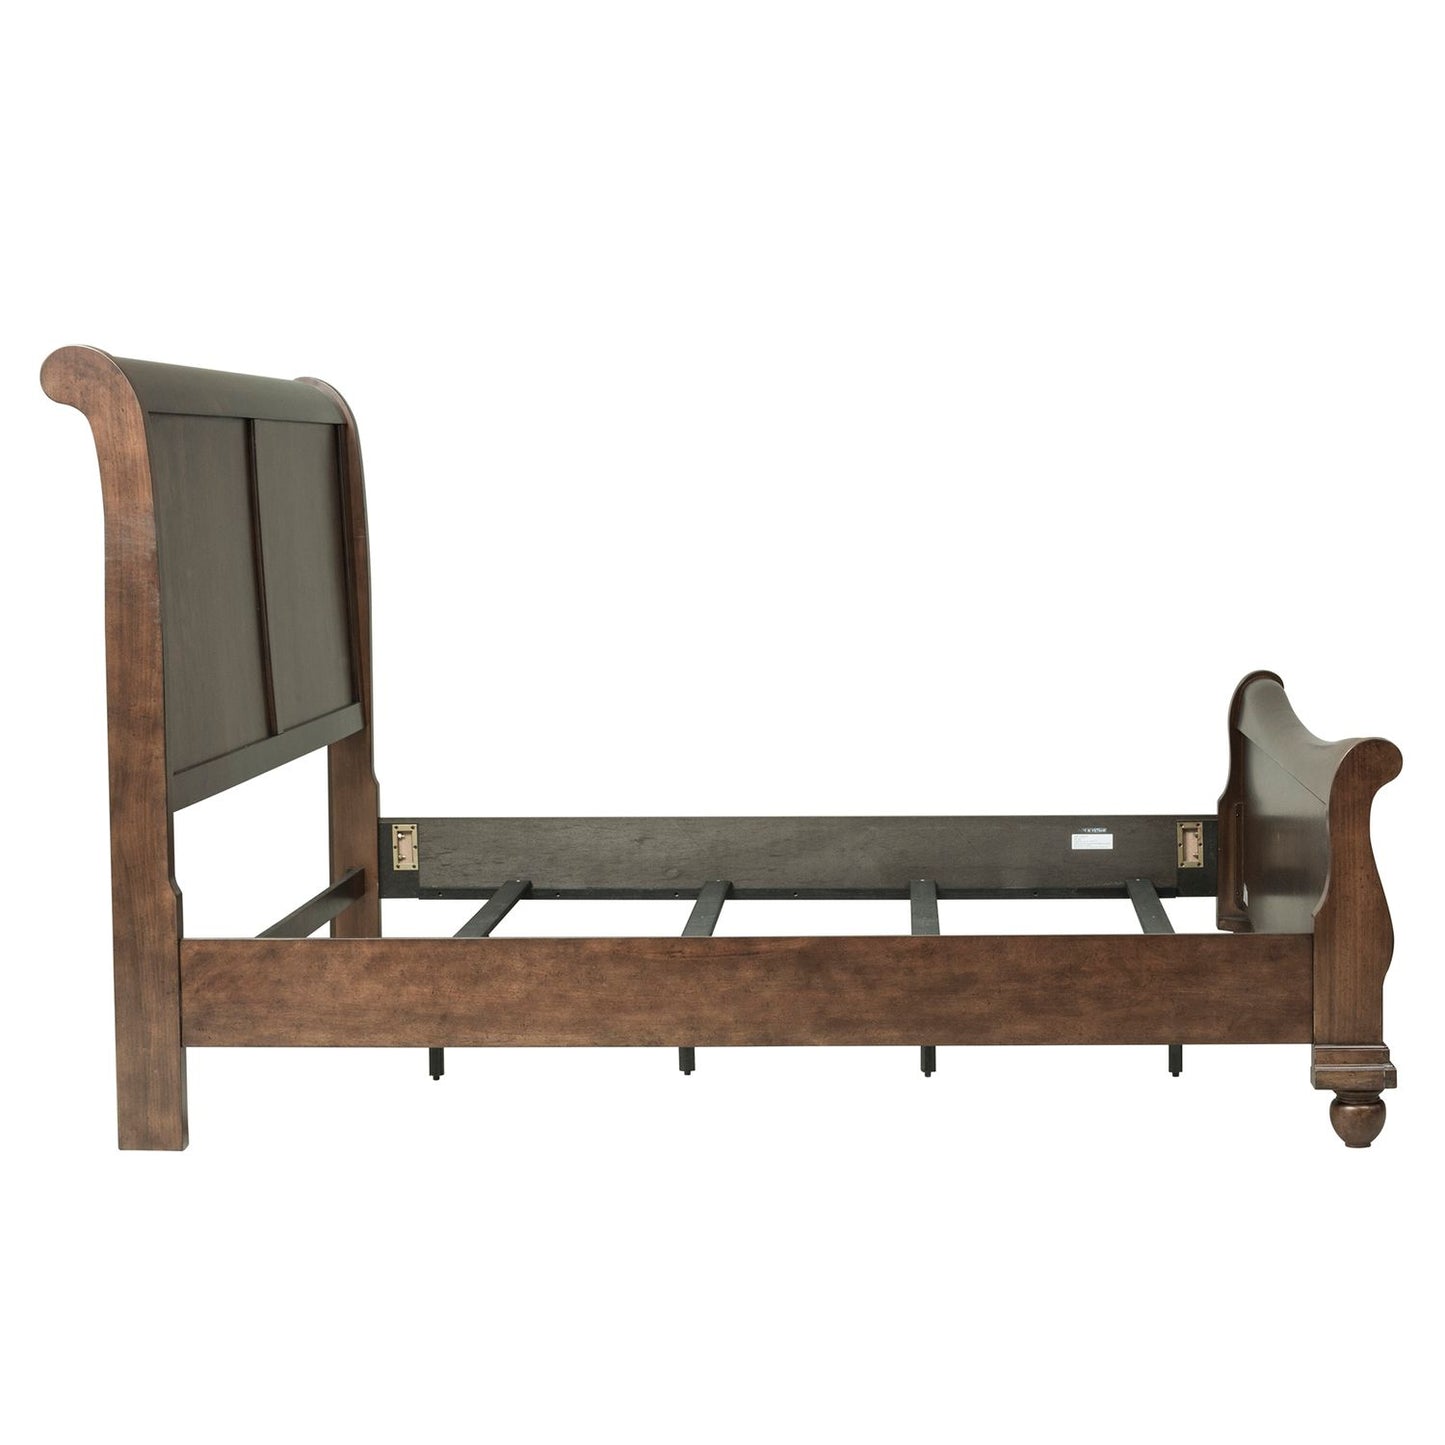 Rustic Traditions - King Sleigh Bed